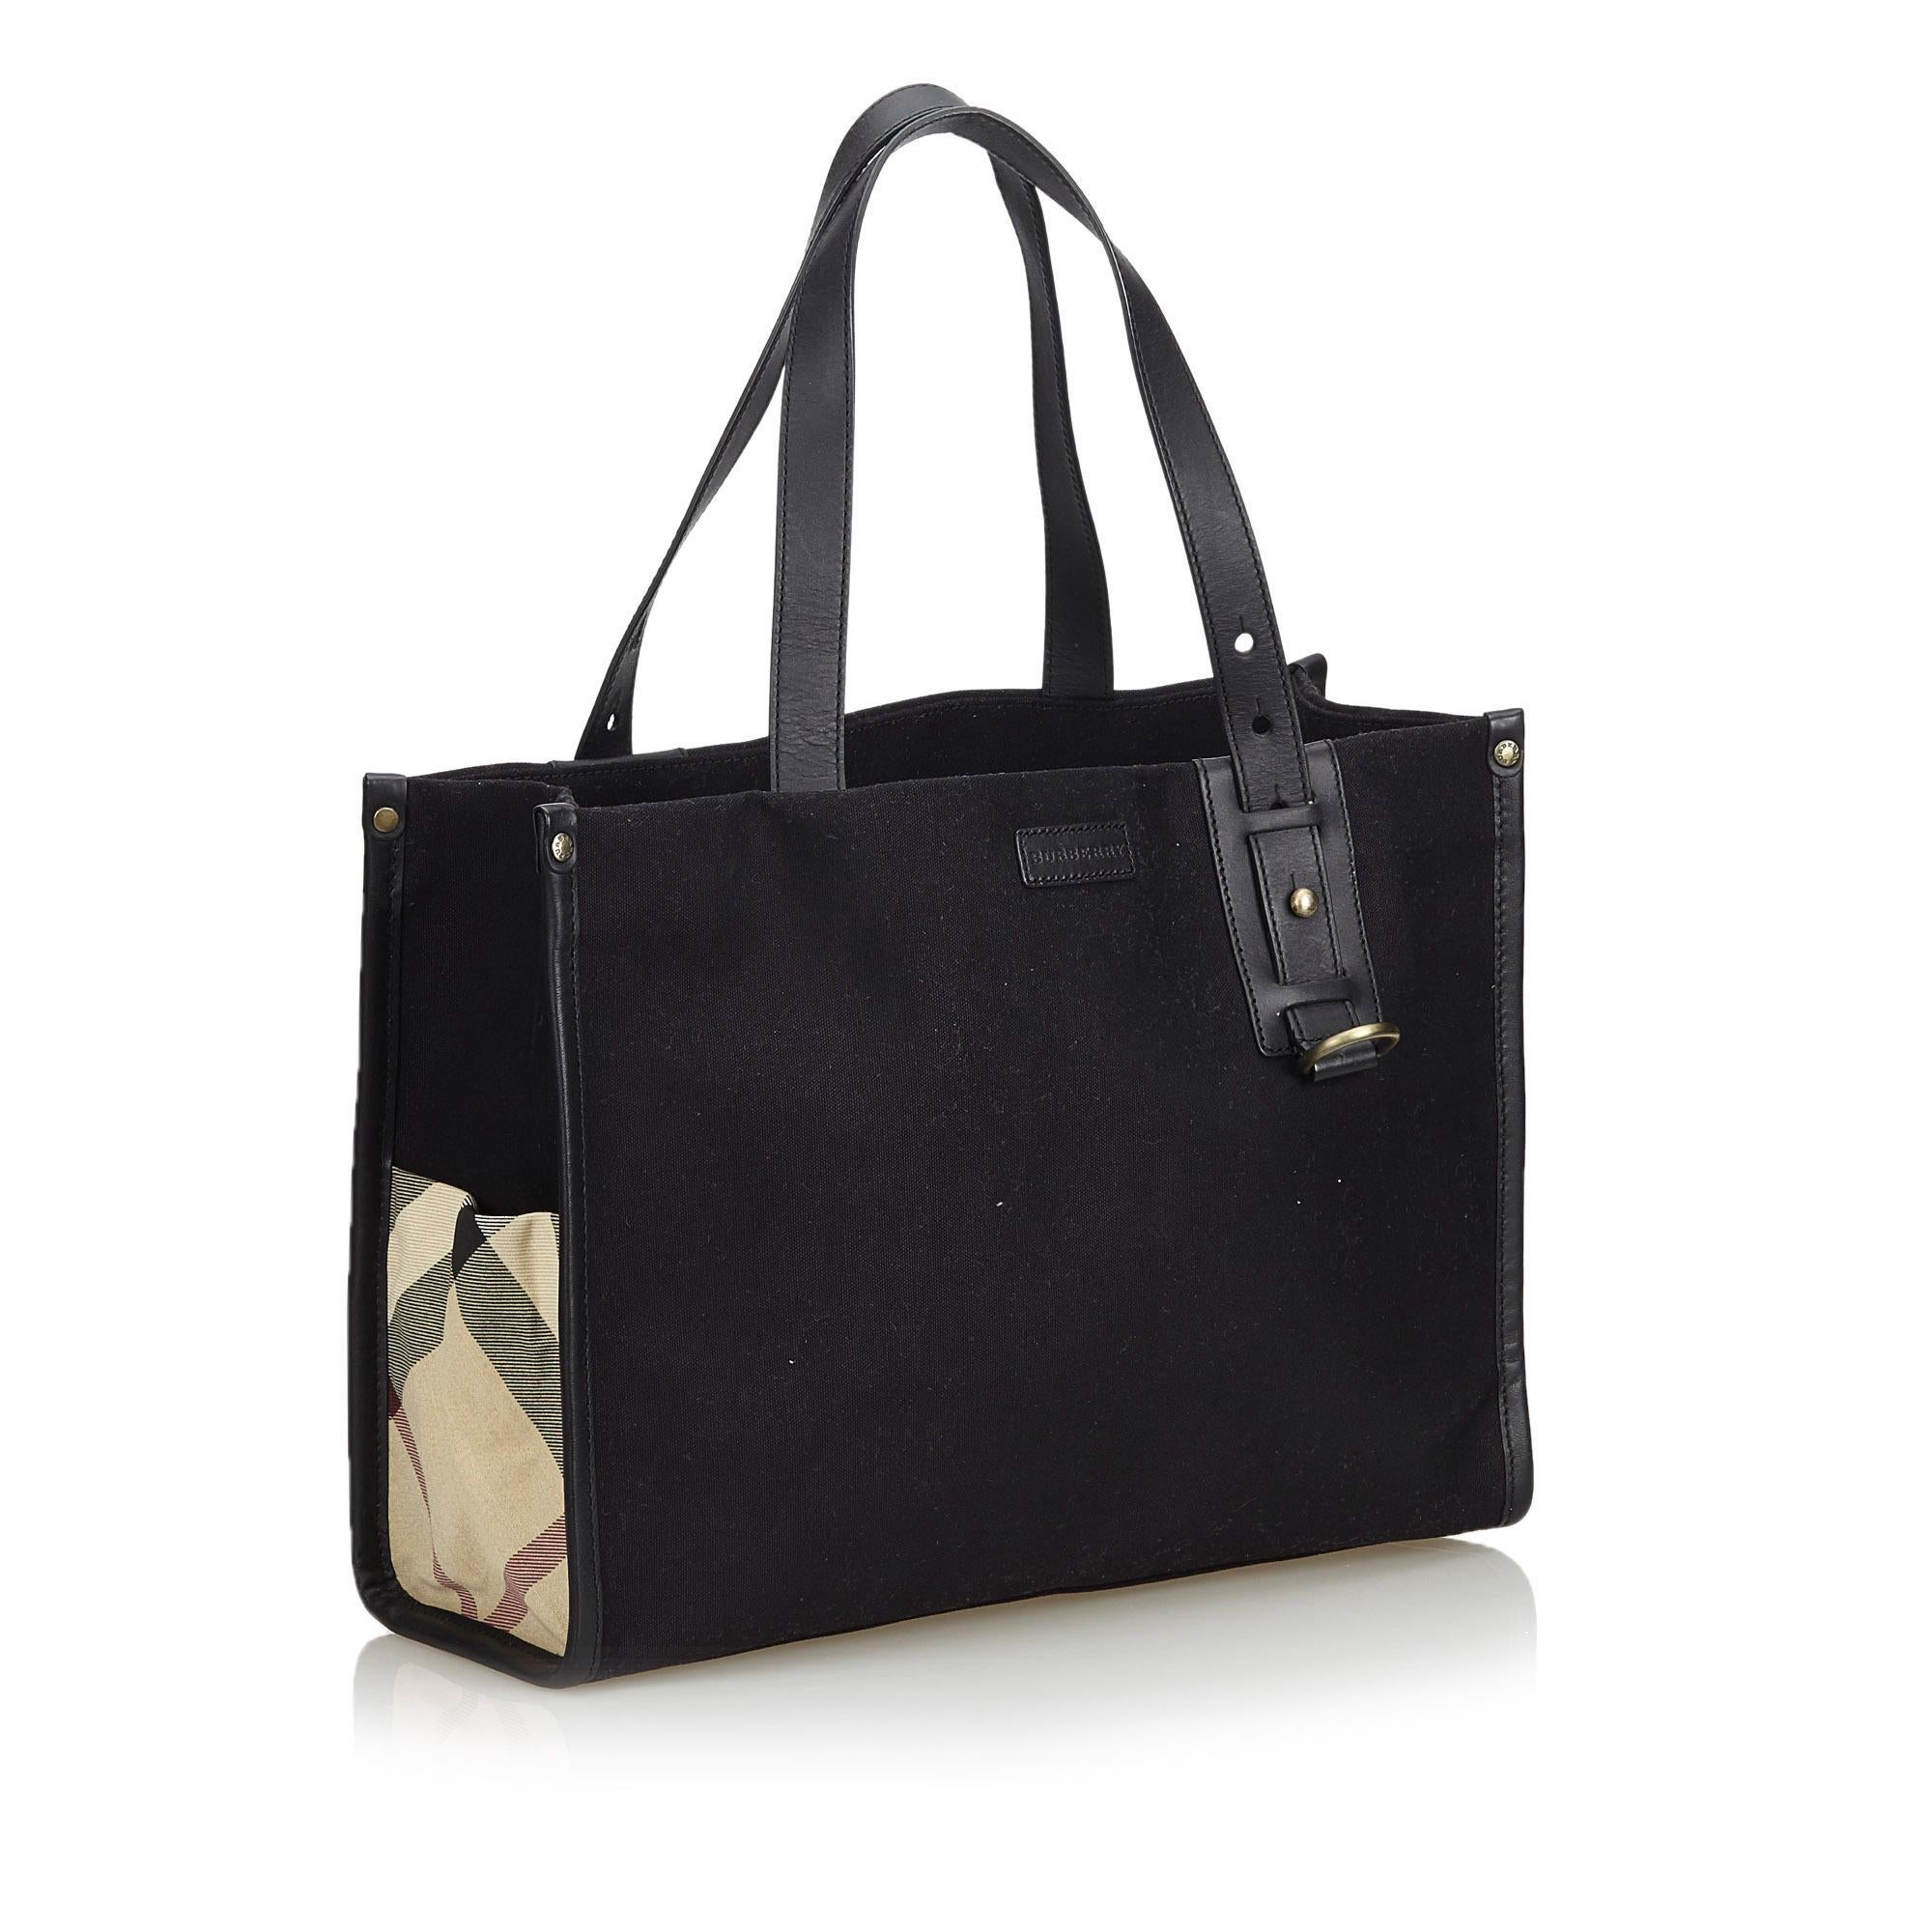 This tote bag features a canvas body with leather trim, side nova check detail, flat leather handles, an open top, and interior zip and slip pockets. It carries as AB condition rating.

Inclusions: 
This item does not come with